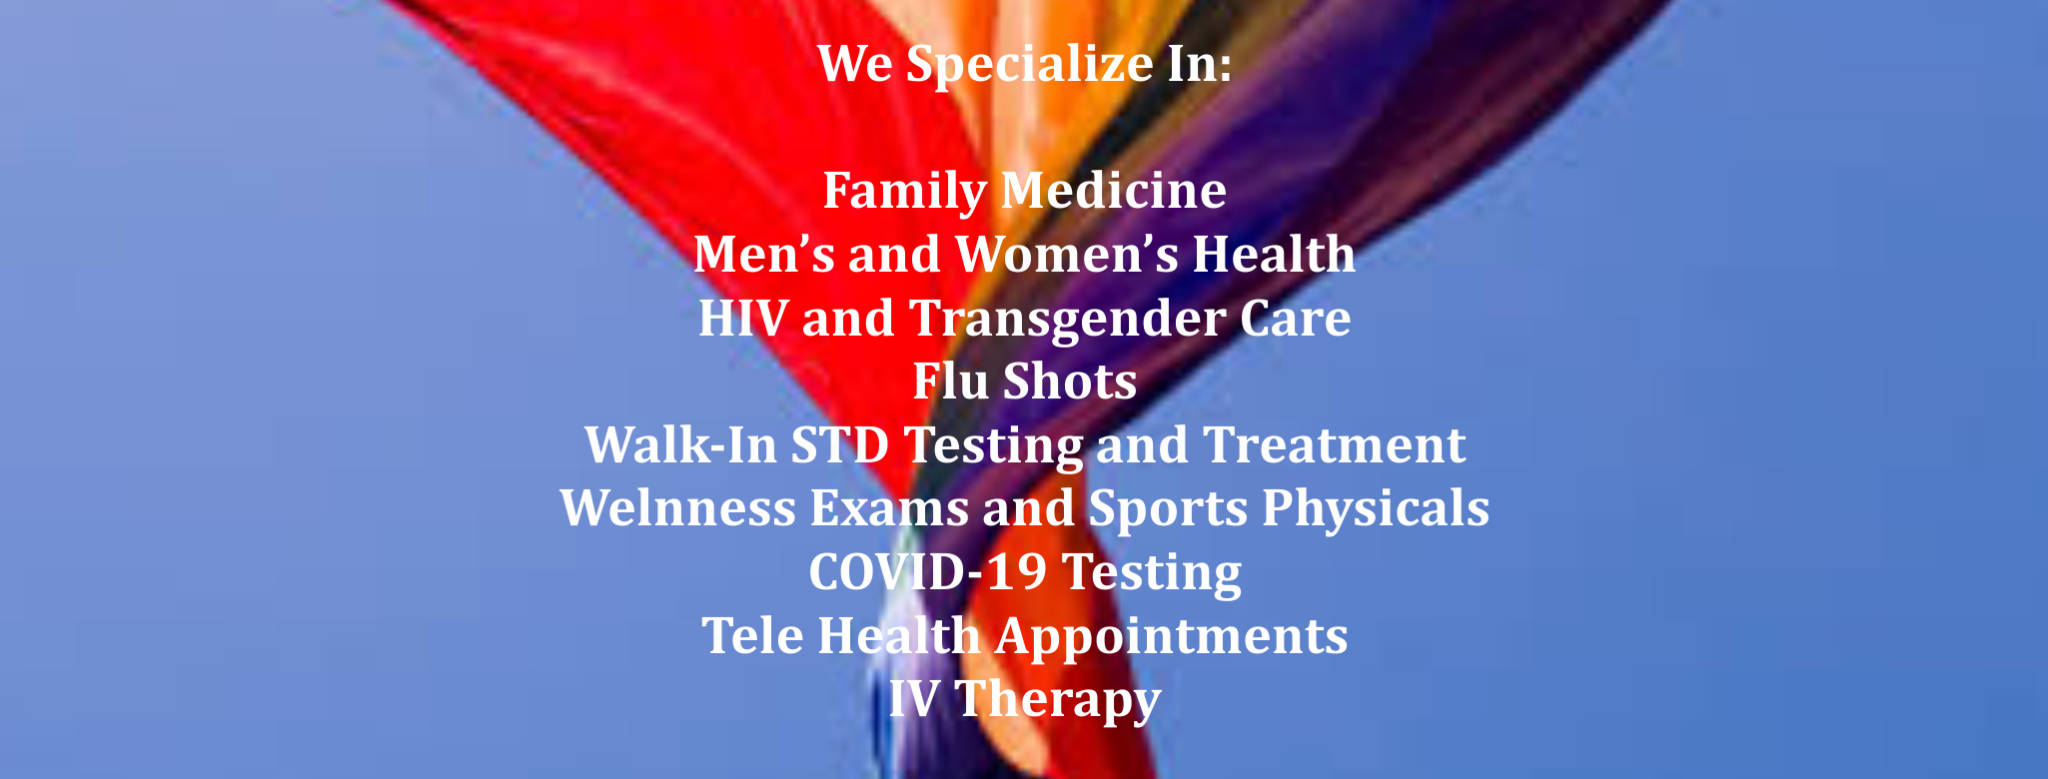 be well family care treatments including a listing of family medicine, women's health, HIV and Transgender Care, Flu Shots. Walk In STD Testing and Treatment, Wellness Exams and Sports Physicals, COVID-19 Testing, Tele Health Appointments and IV therapy